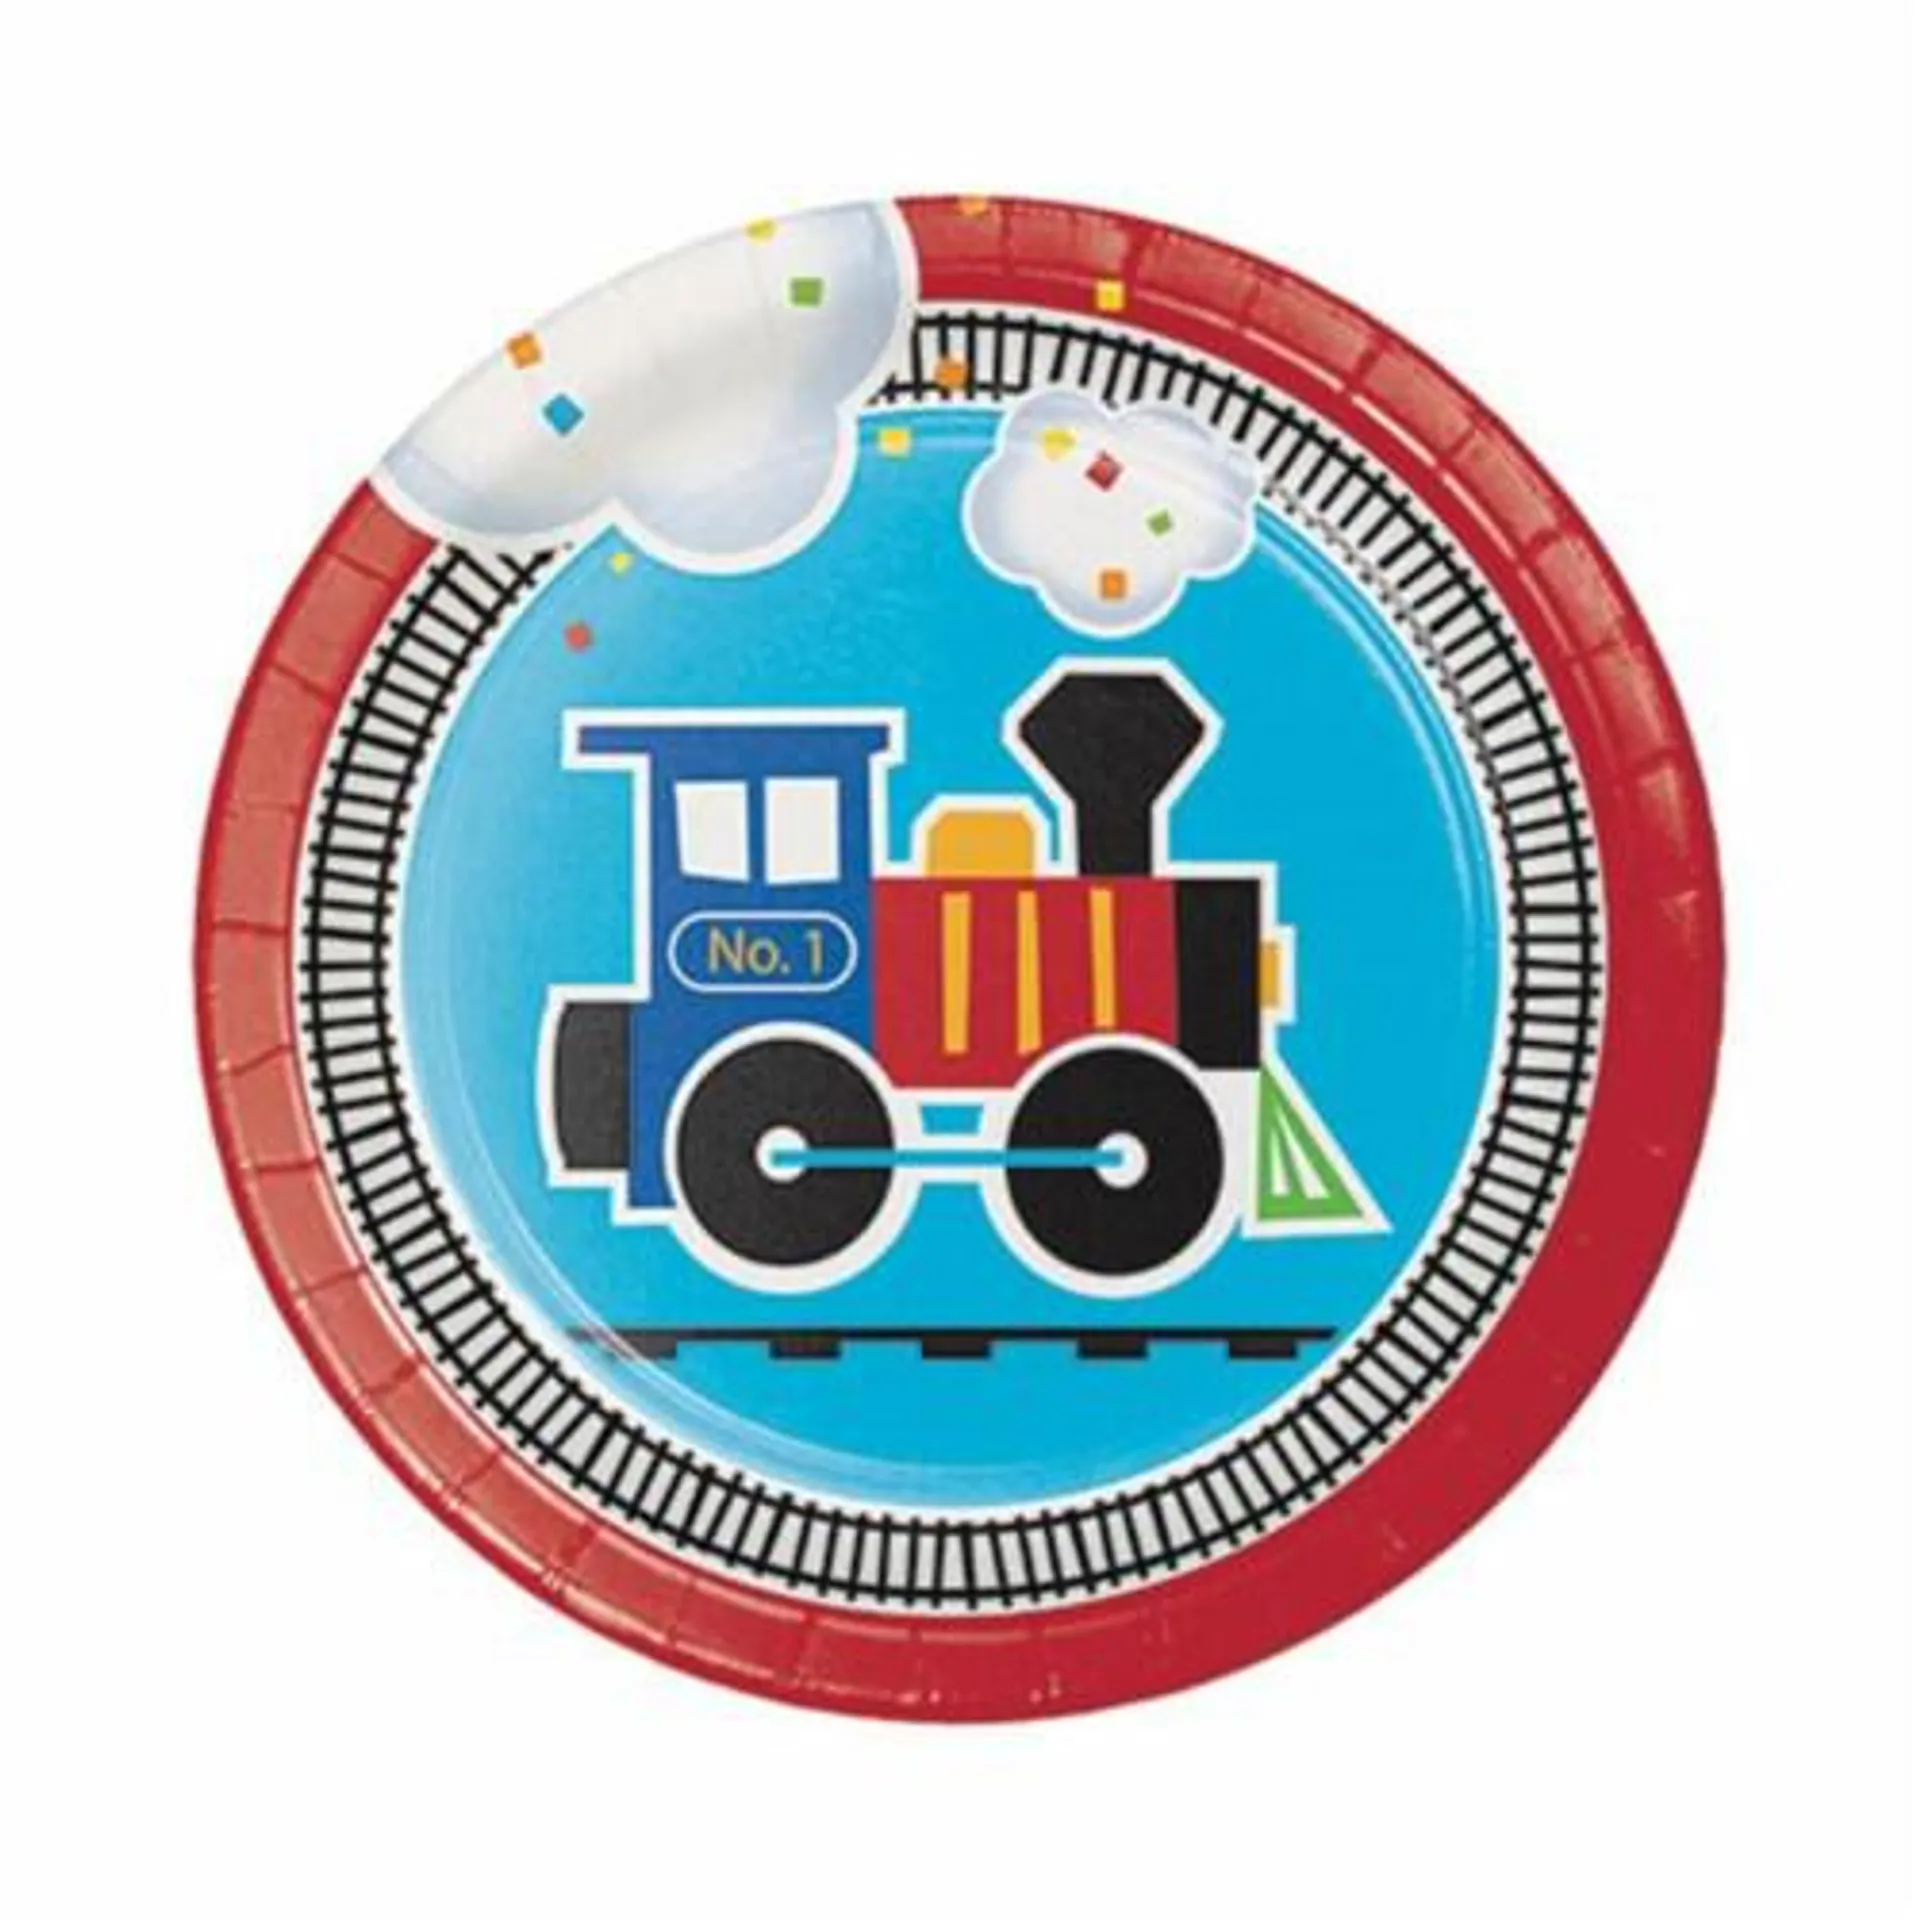 Hoffmaster Group 322204 All Aboard Luncheon Plate, Pack of 12 - 8 Per Pack